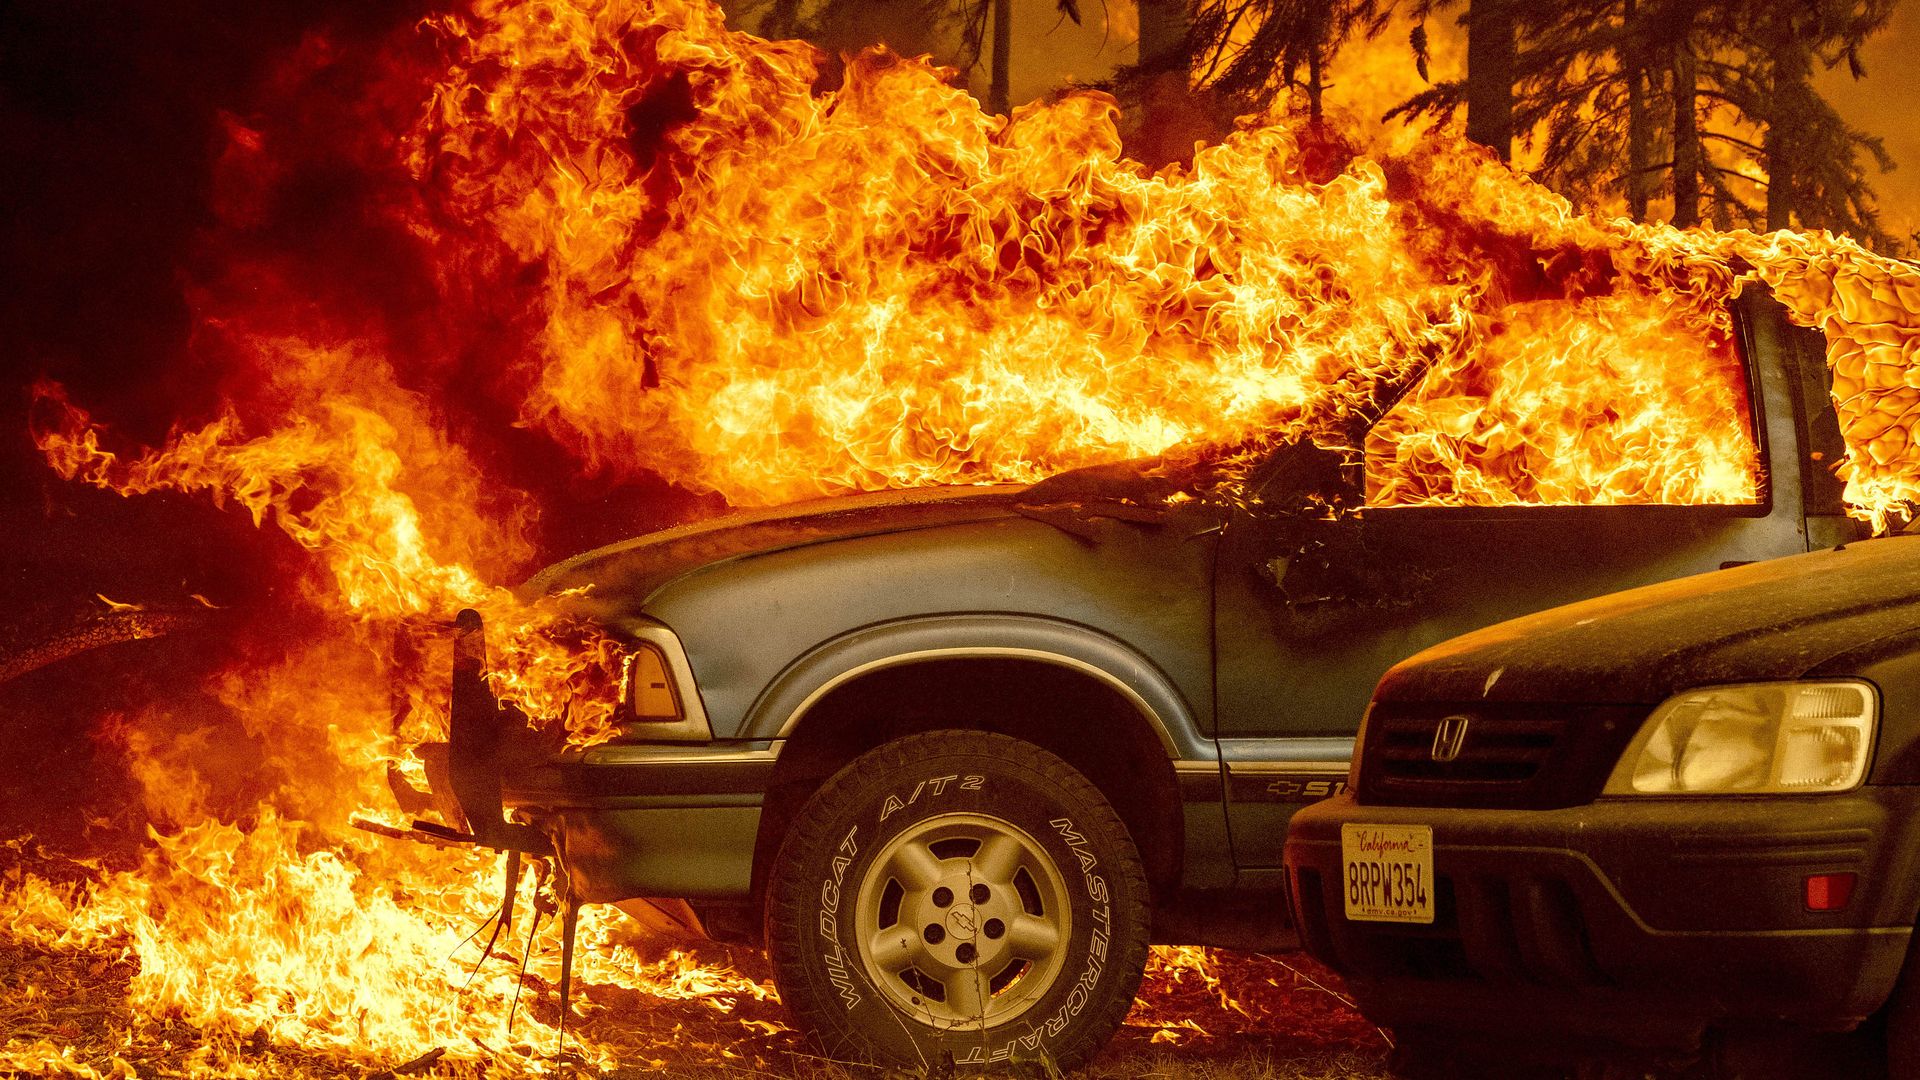 Fire burning in two cars.